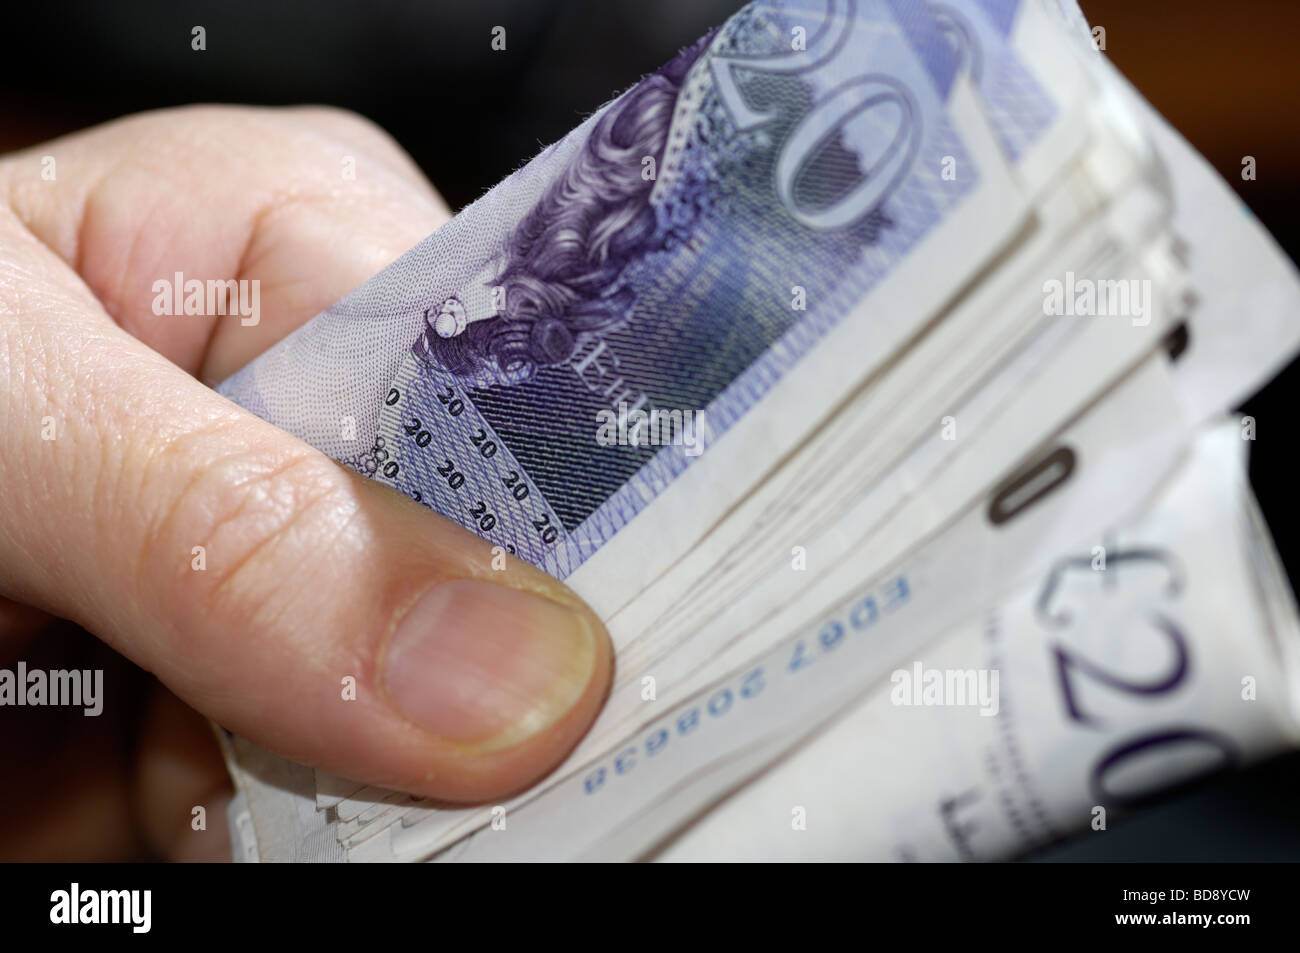 Hand holding a bundle of British sterling bank notes Stock Photo